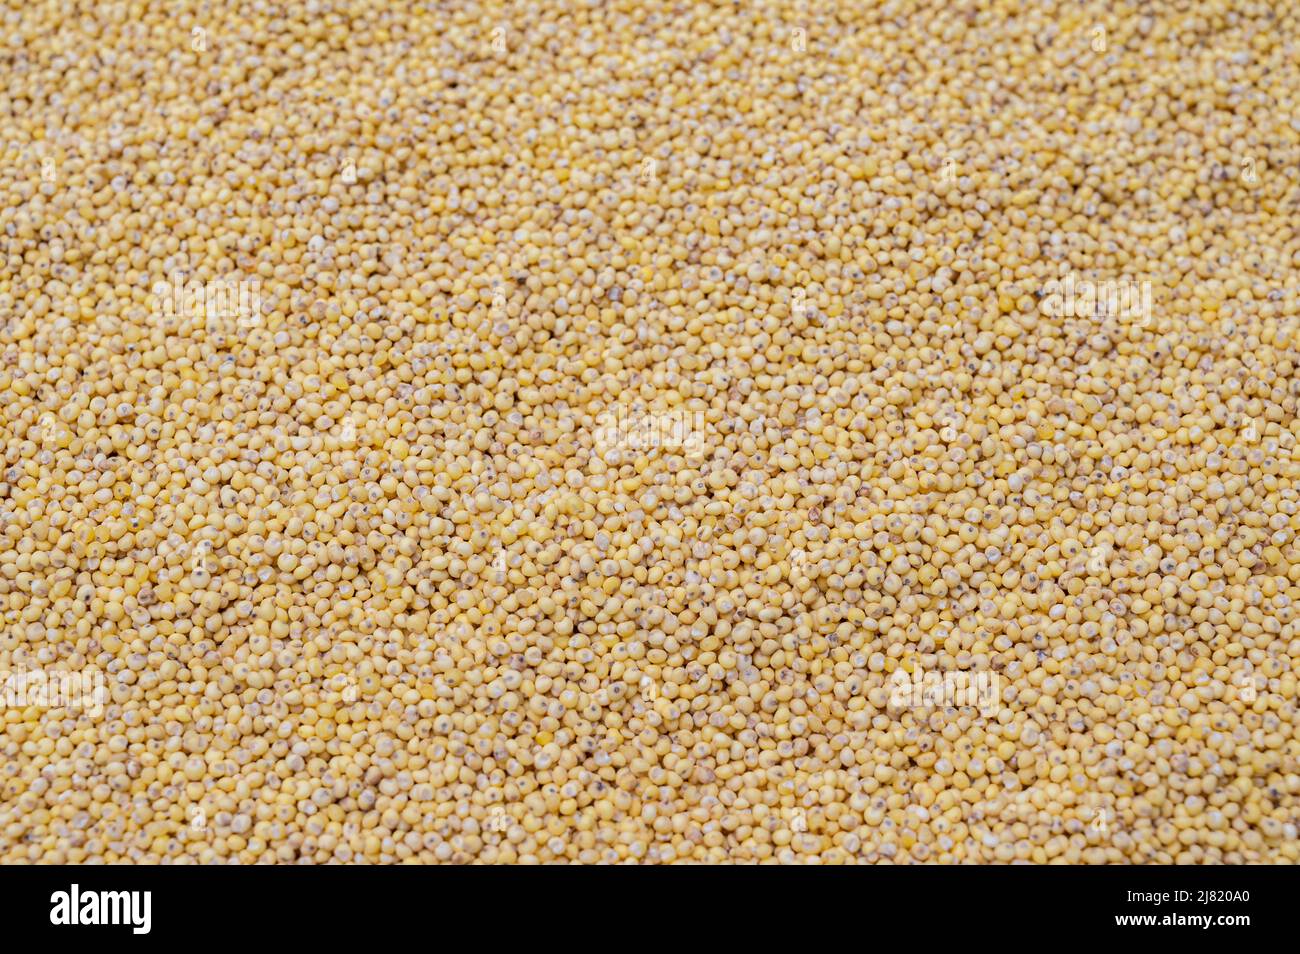 Millet top view background. Grain background. Stock Photo